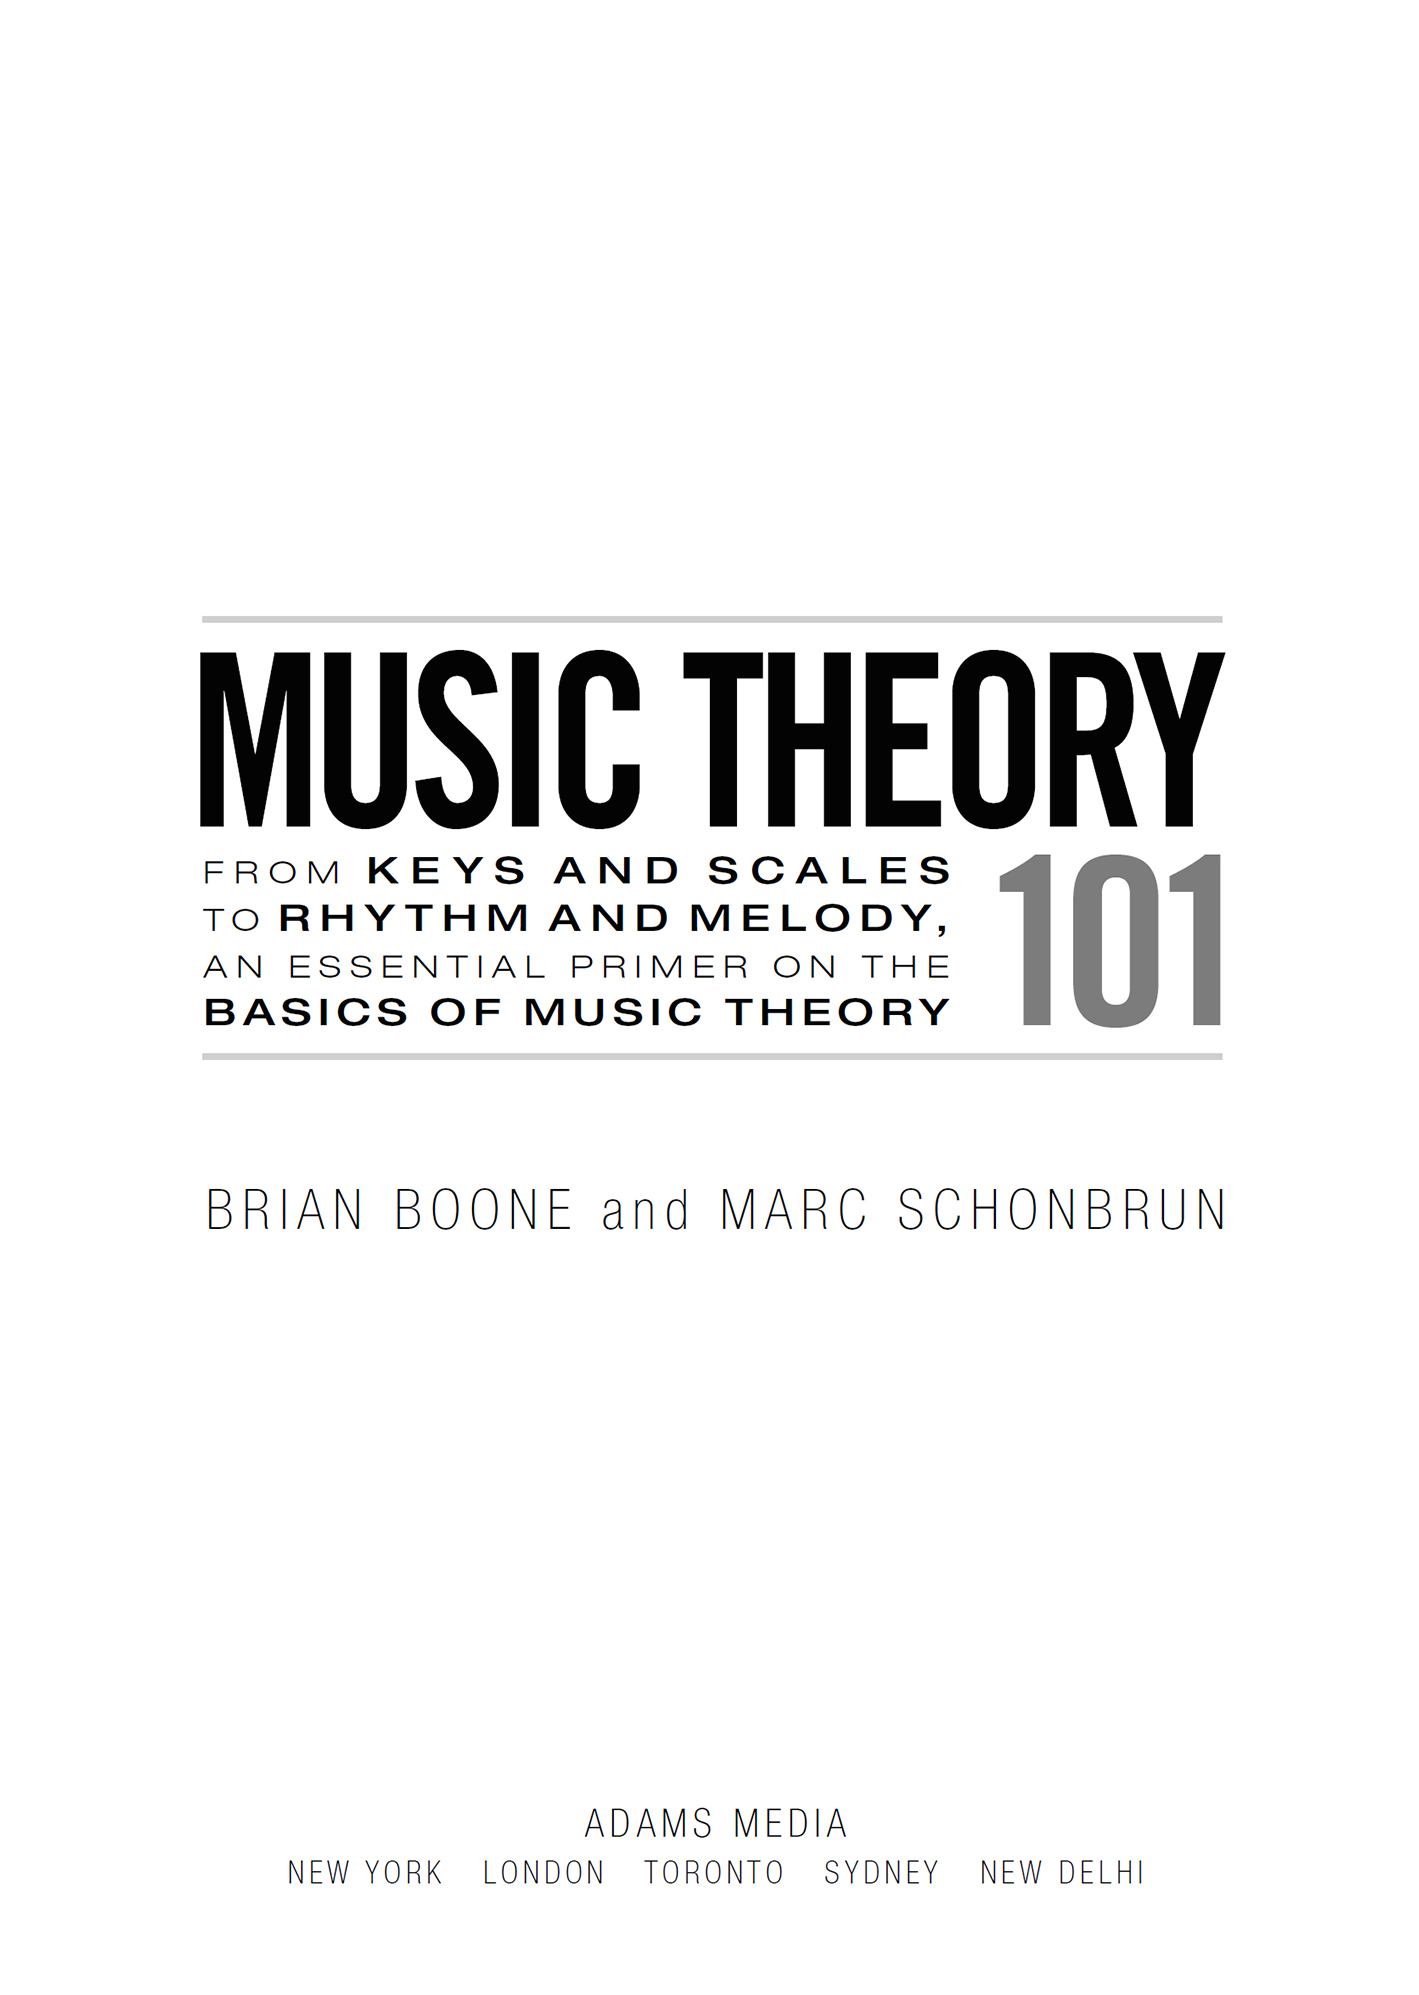 Music Theory 101 From Keys and Scales to Rhythm and Melody an Essential Primer on the Basics of Music Theory - image 2